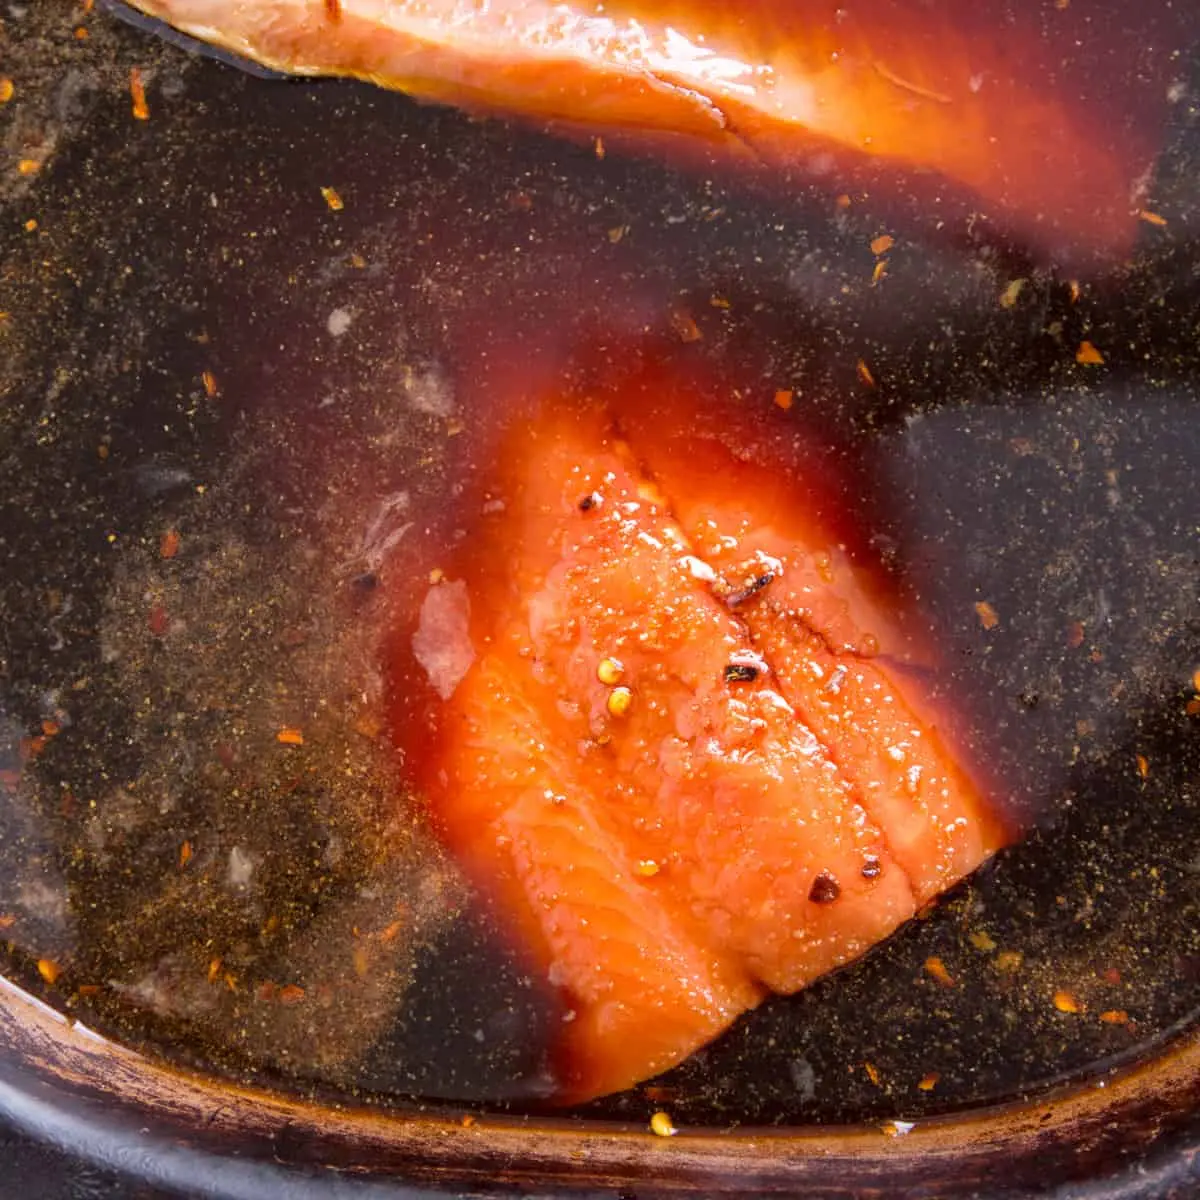 brine for cold smoked salmon - What's the best brine for smoking salmon